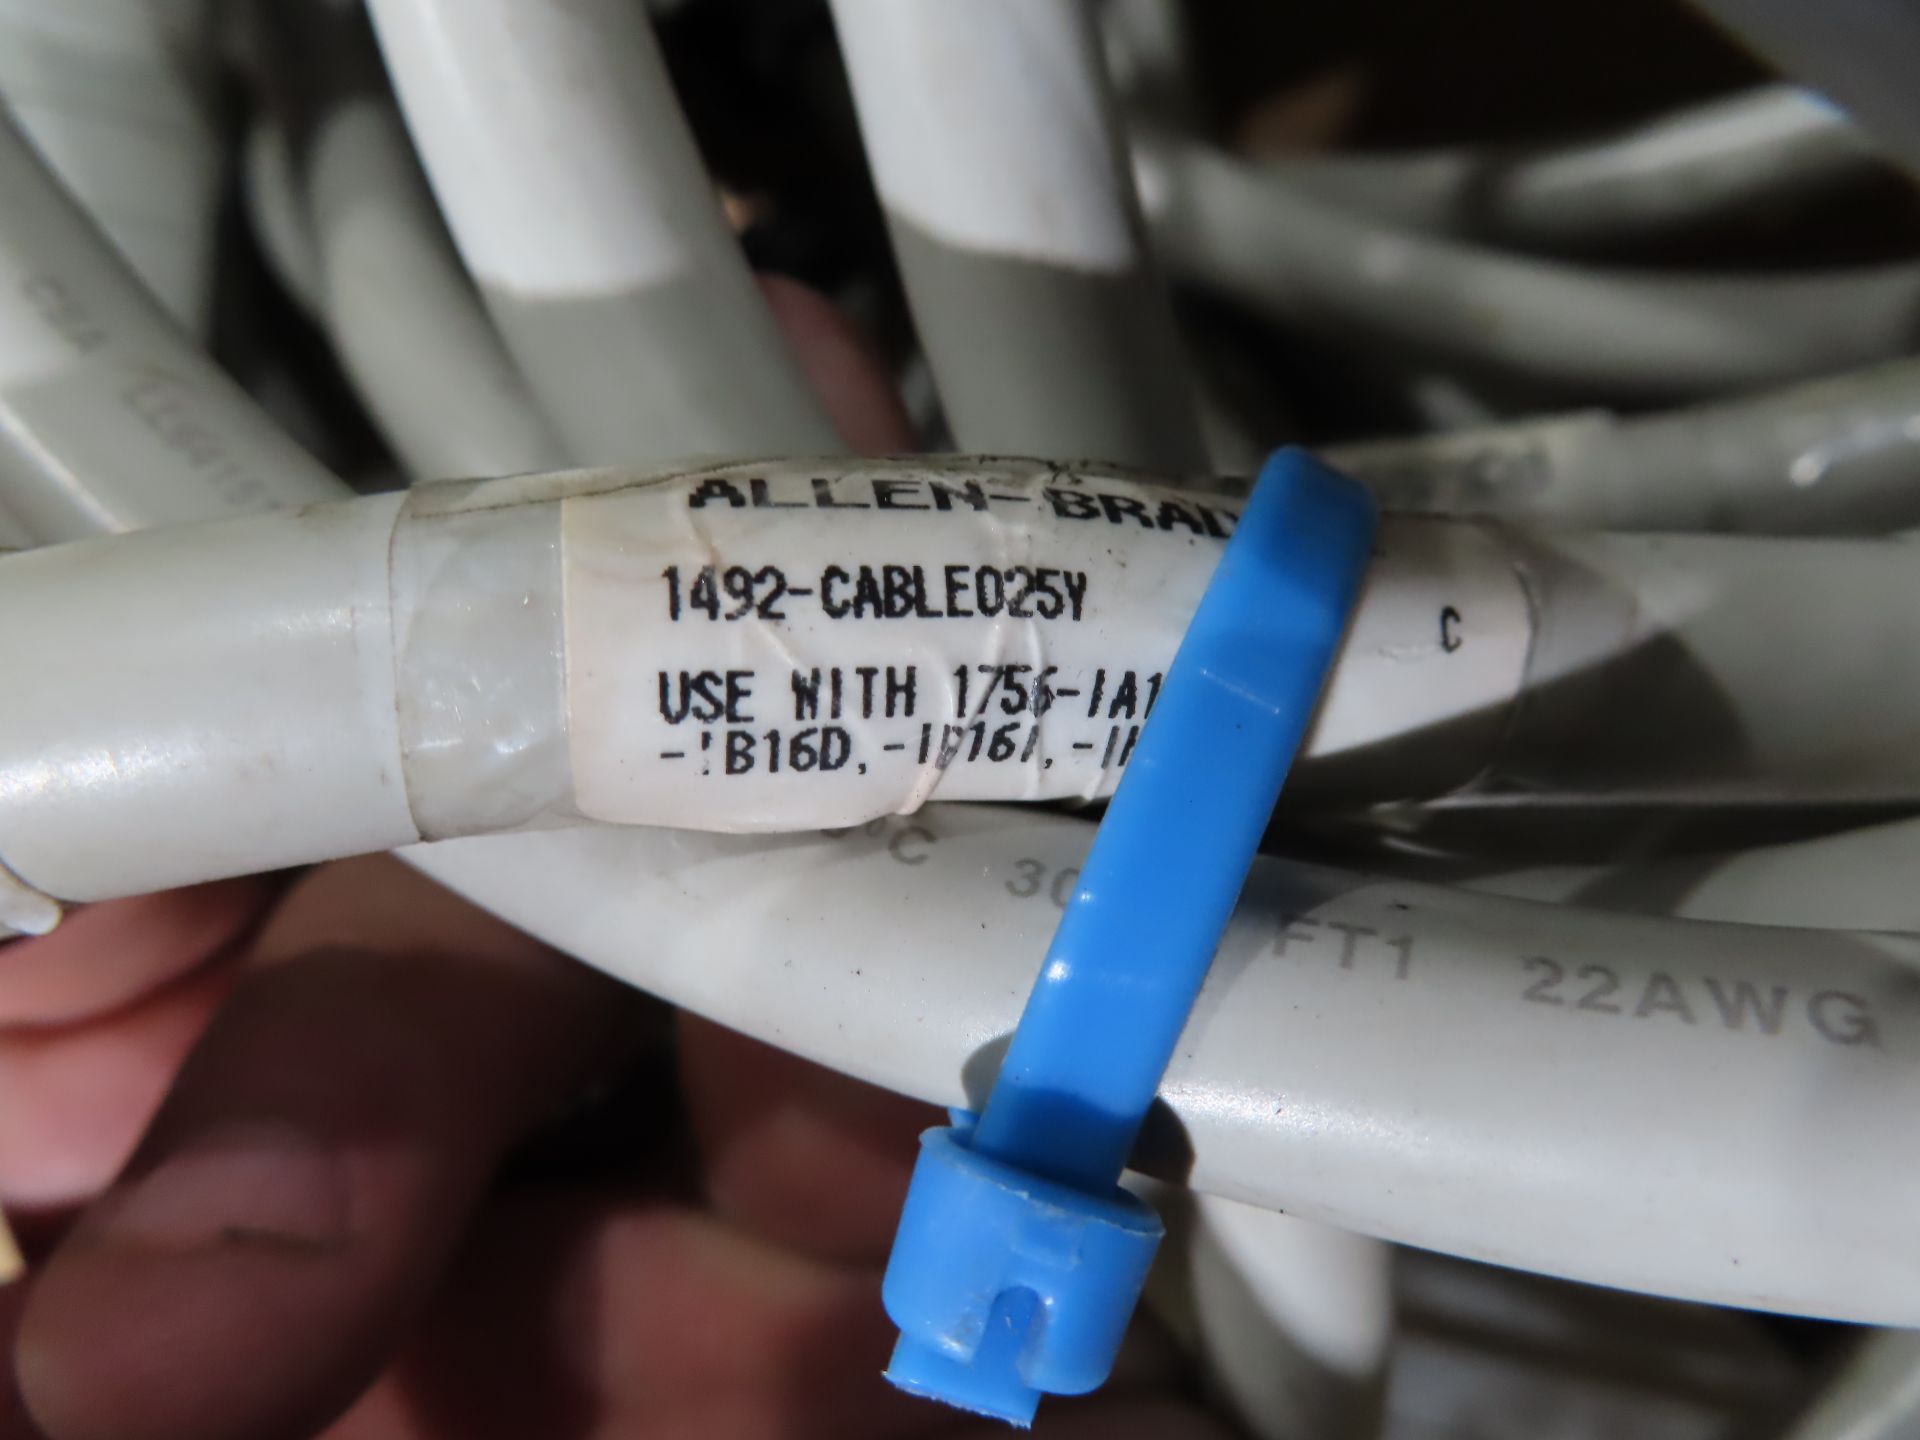 Qty 8 Allen Bradley 1492-Cable025Y, as always, with Brolyn LLC auctions, all lots can be picked up - Image 2 of 2